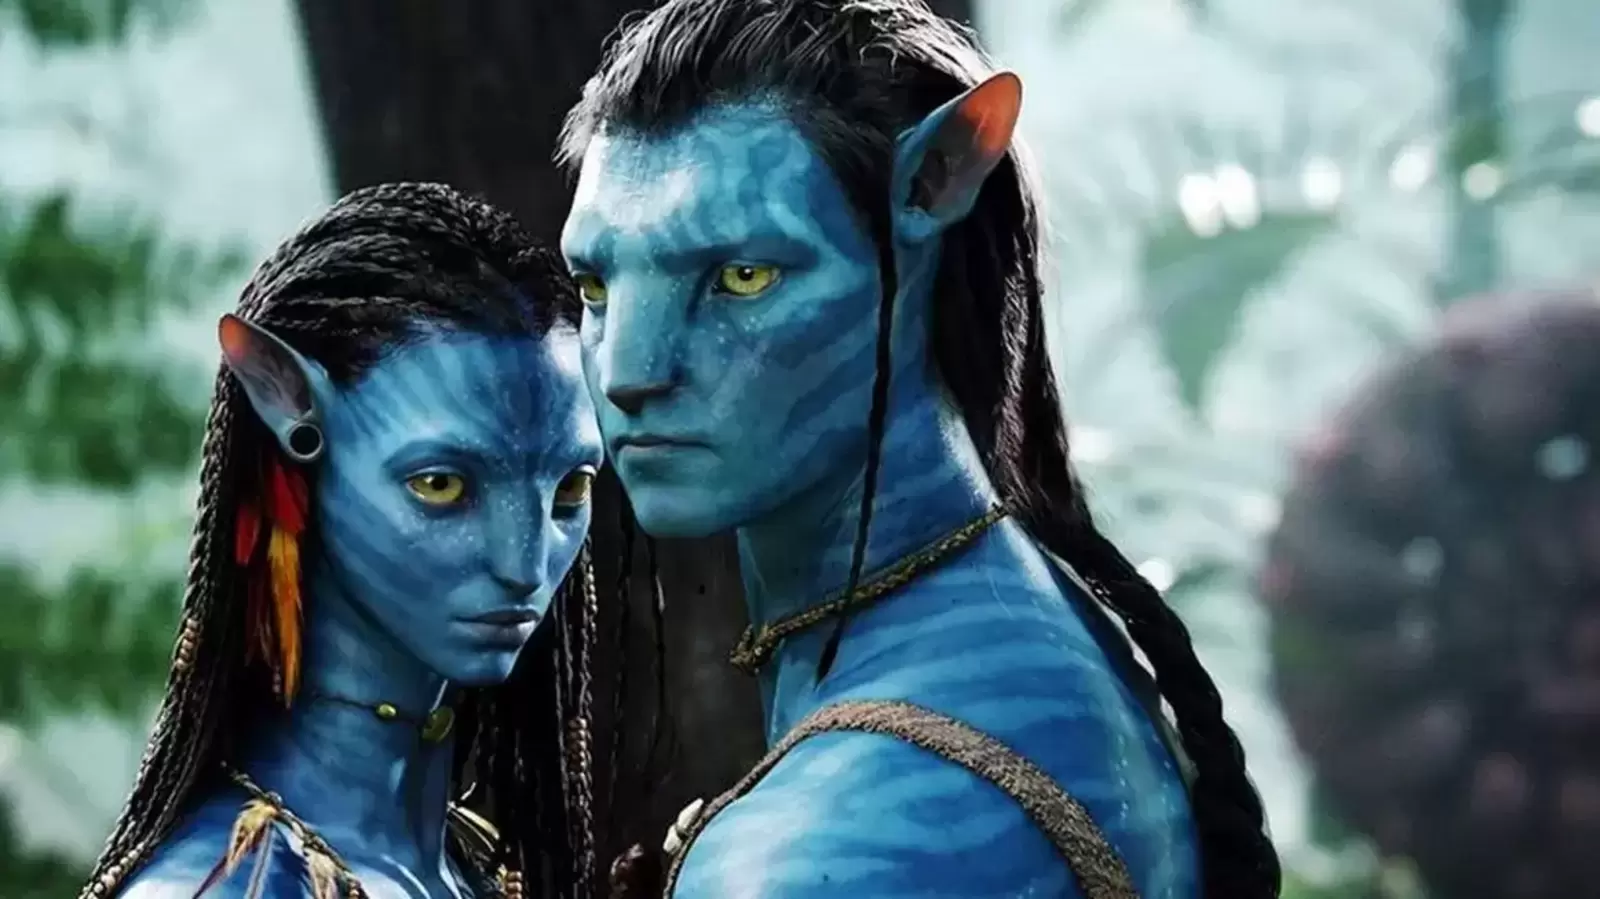 Avatar The Way of Water box office: James Cameron movie crosses $1 billion in 14 days; 6th fastest film ever to do so